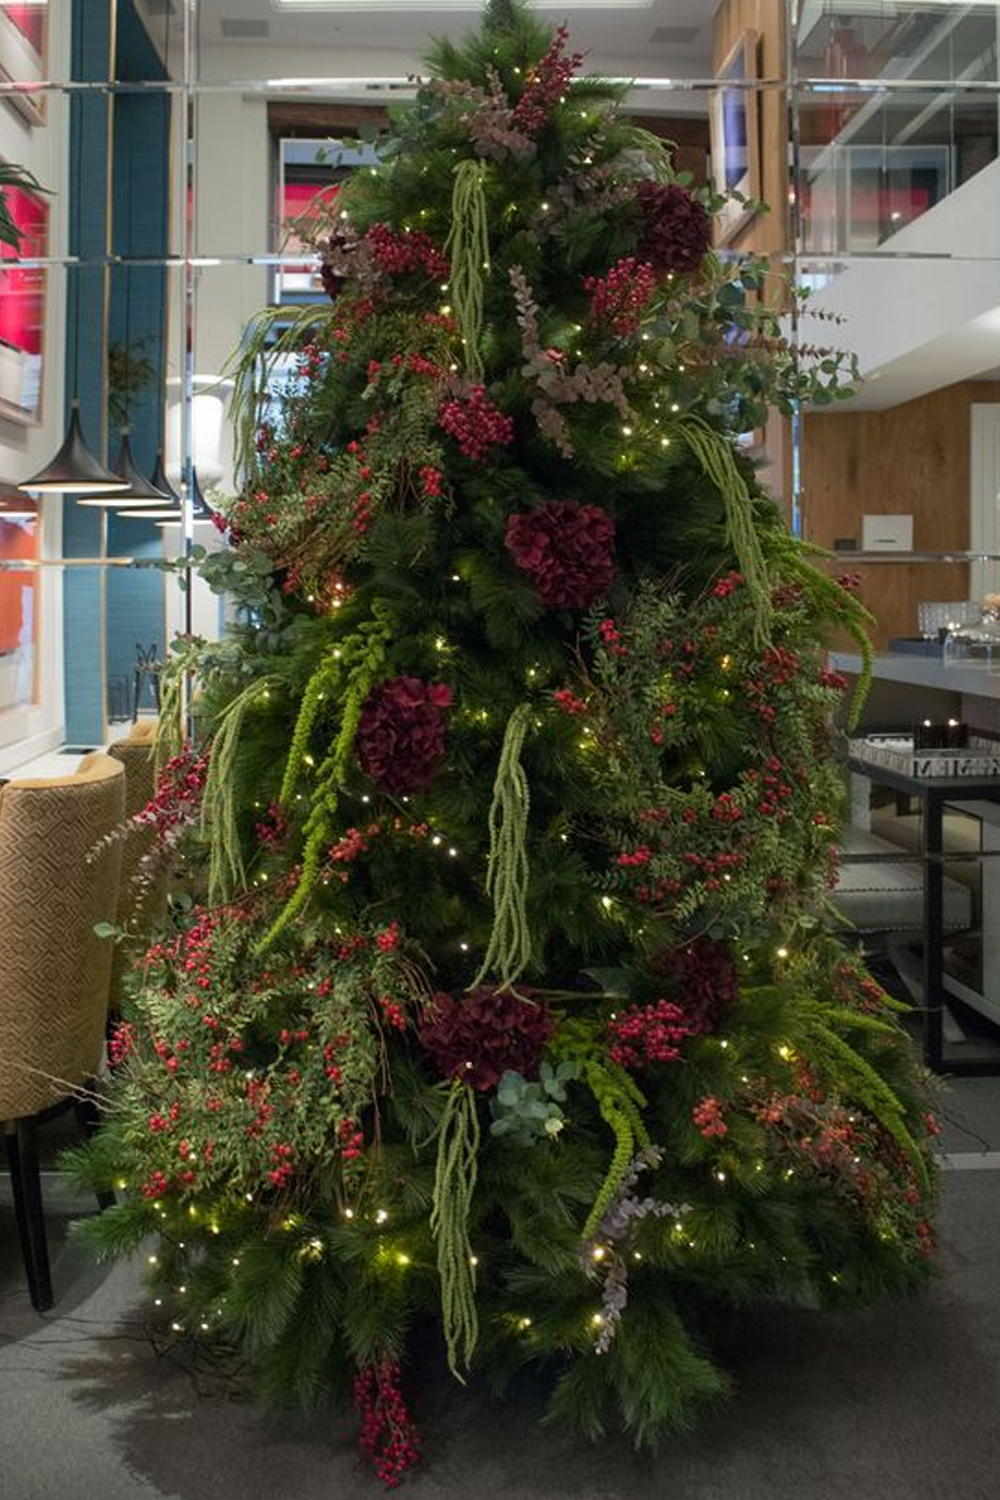 Not Your Average Christmas Tree- 9 Unique Holiday Tree Decorating Ideas & Inspiration